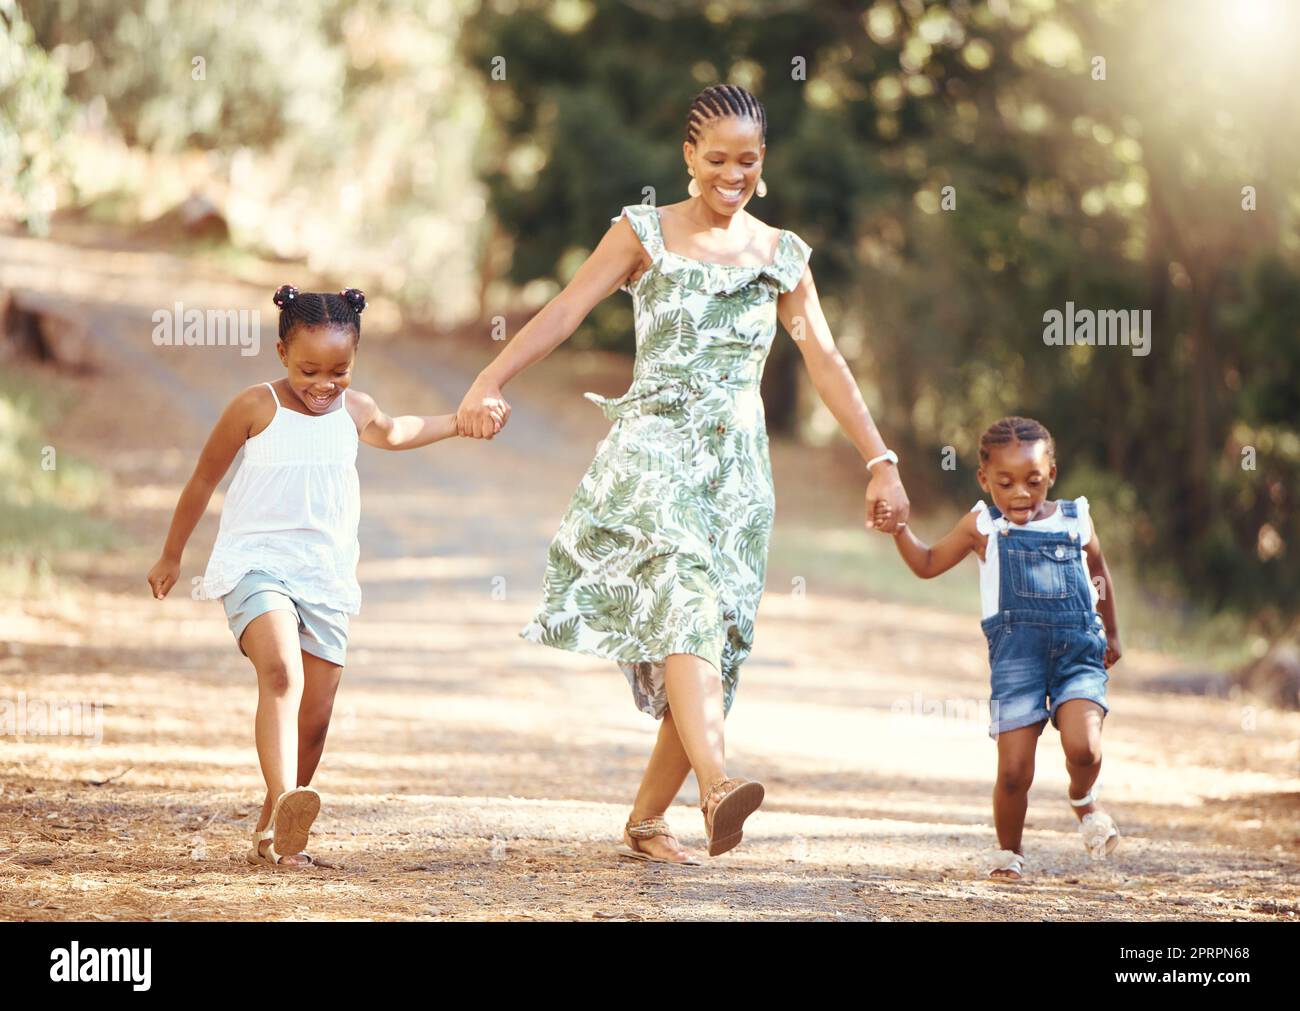 Happy, mother and kids walking in a forest holding hands in nature in joyful happiness and smiling. Black family of a mom and her little girls bonding on a fun walk in the natural outdoor environment Stock Photo